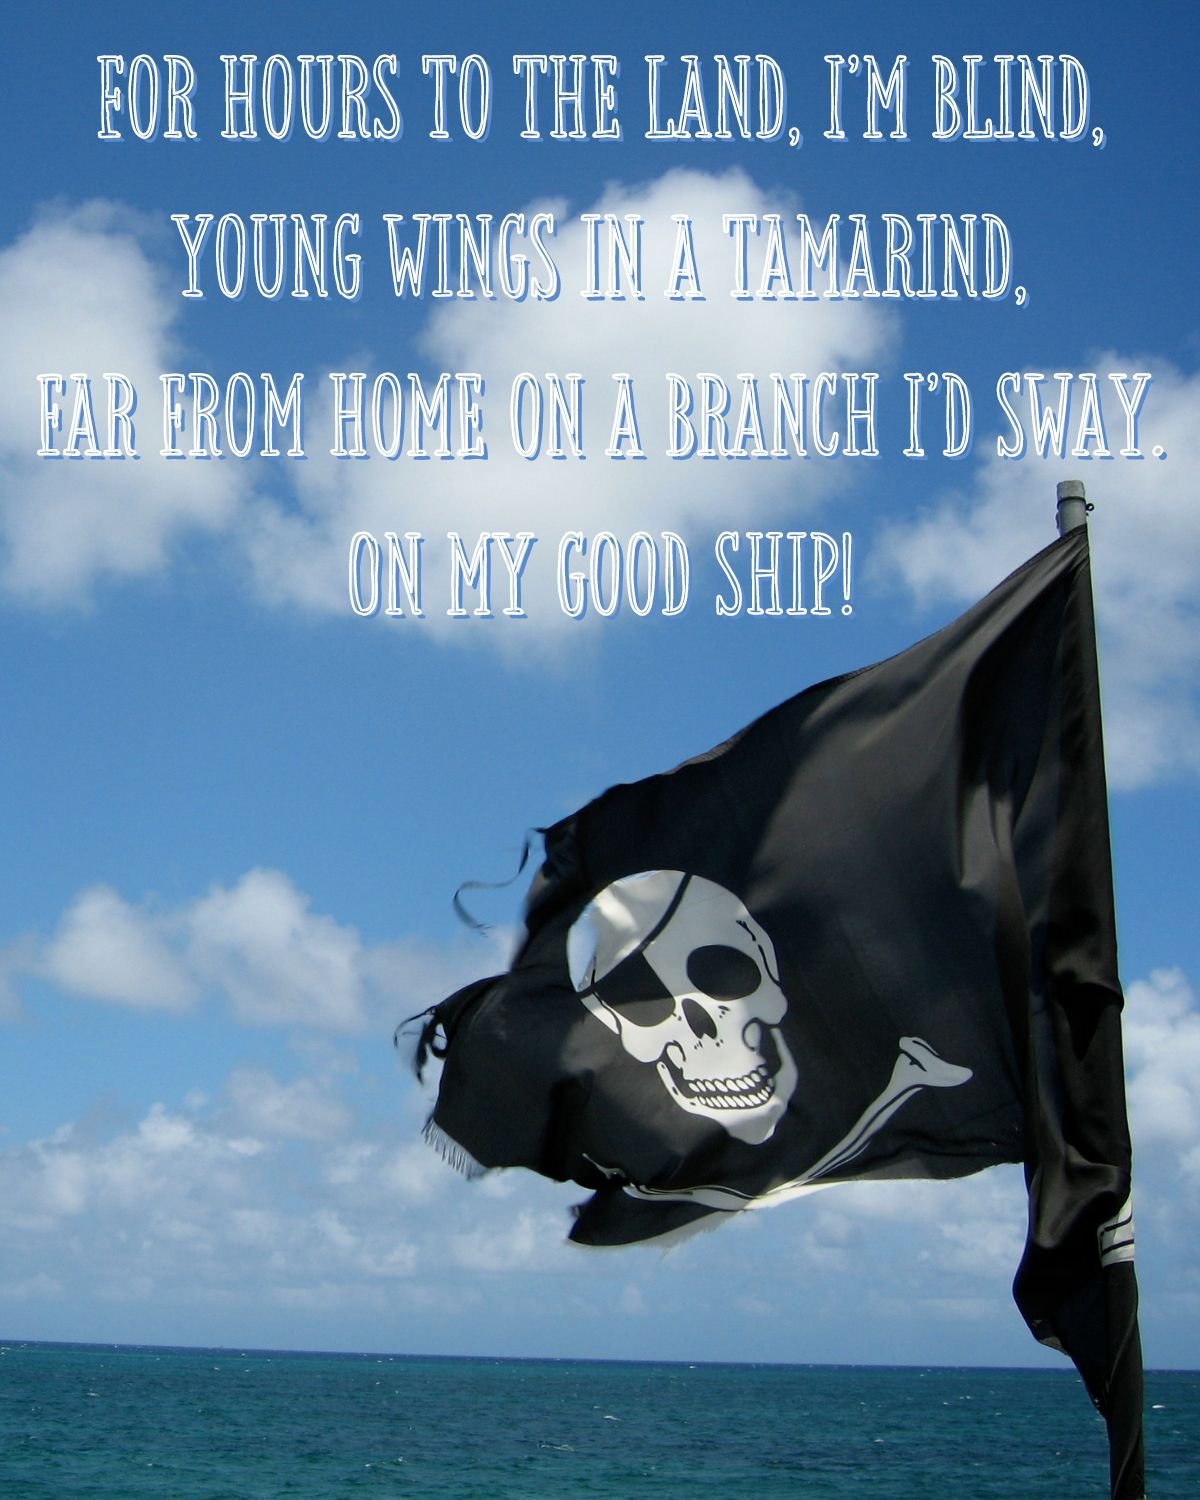 A skull flag flying in the wind on the open sea 